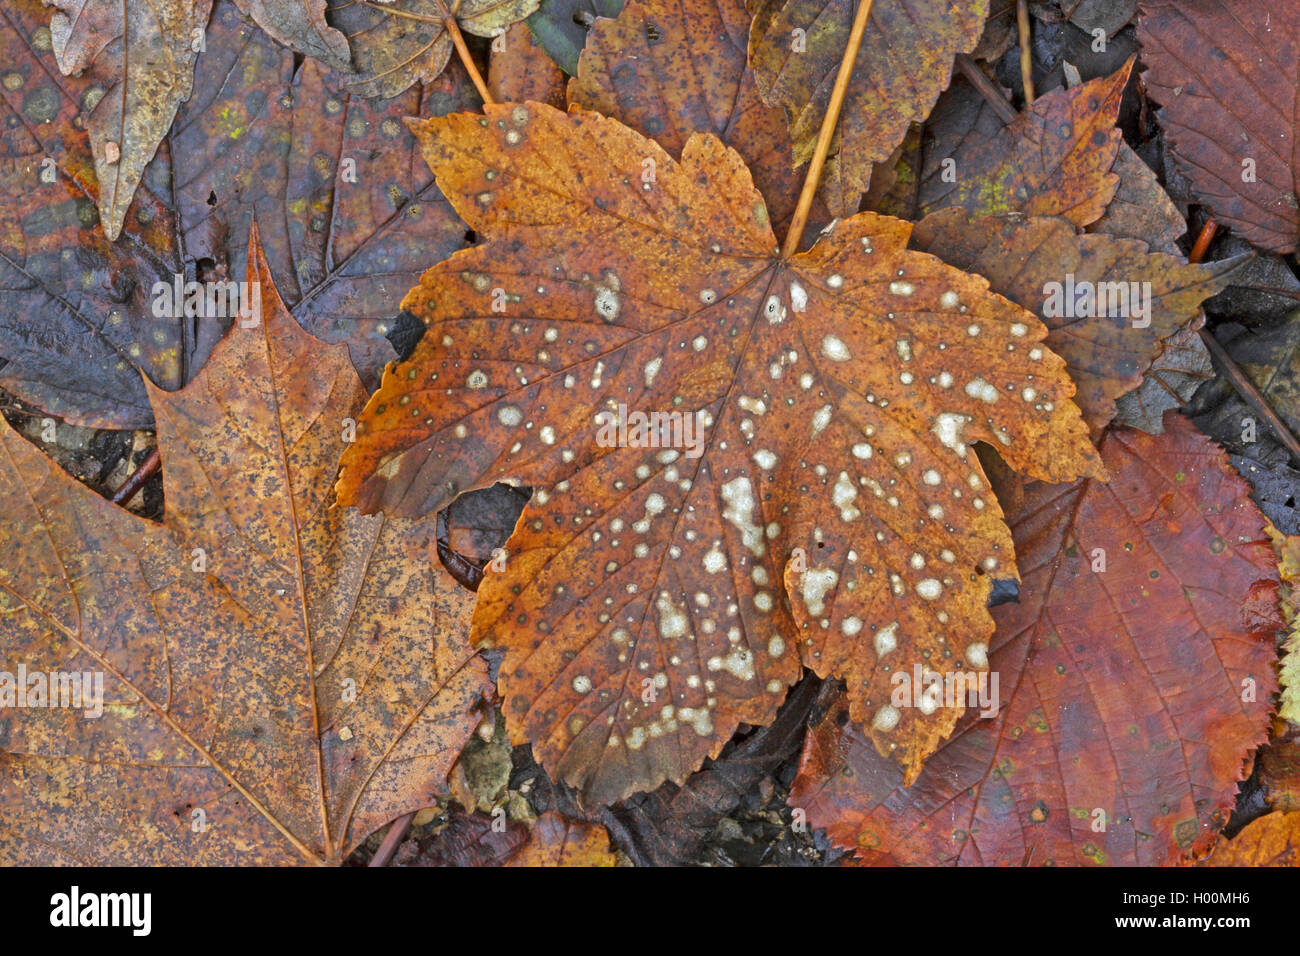 sycamore maple, great maple (Acer pseudoplatanus), decaying autumn leaf, Germany Stock Photo